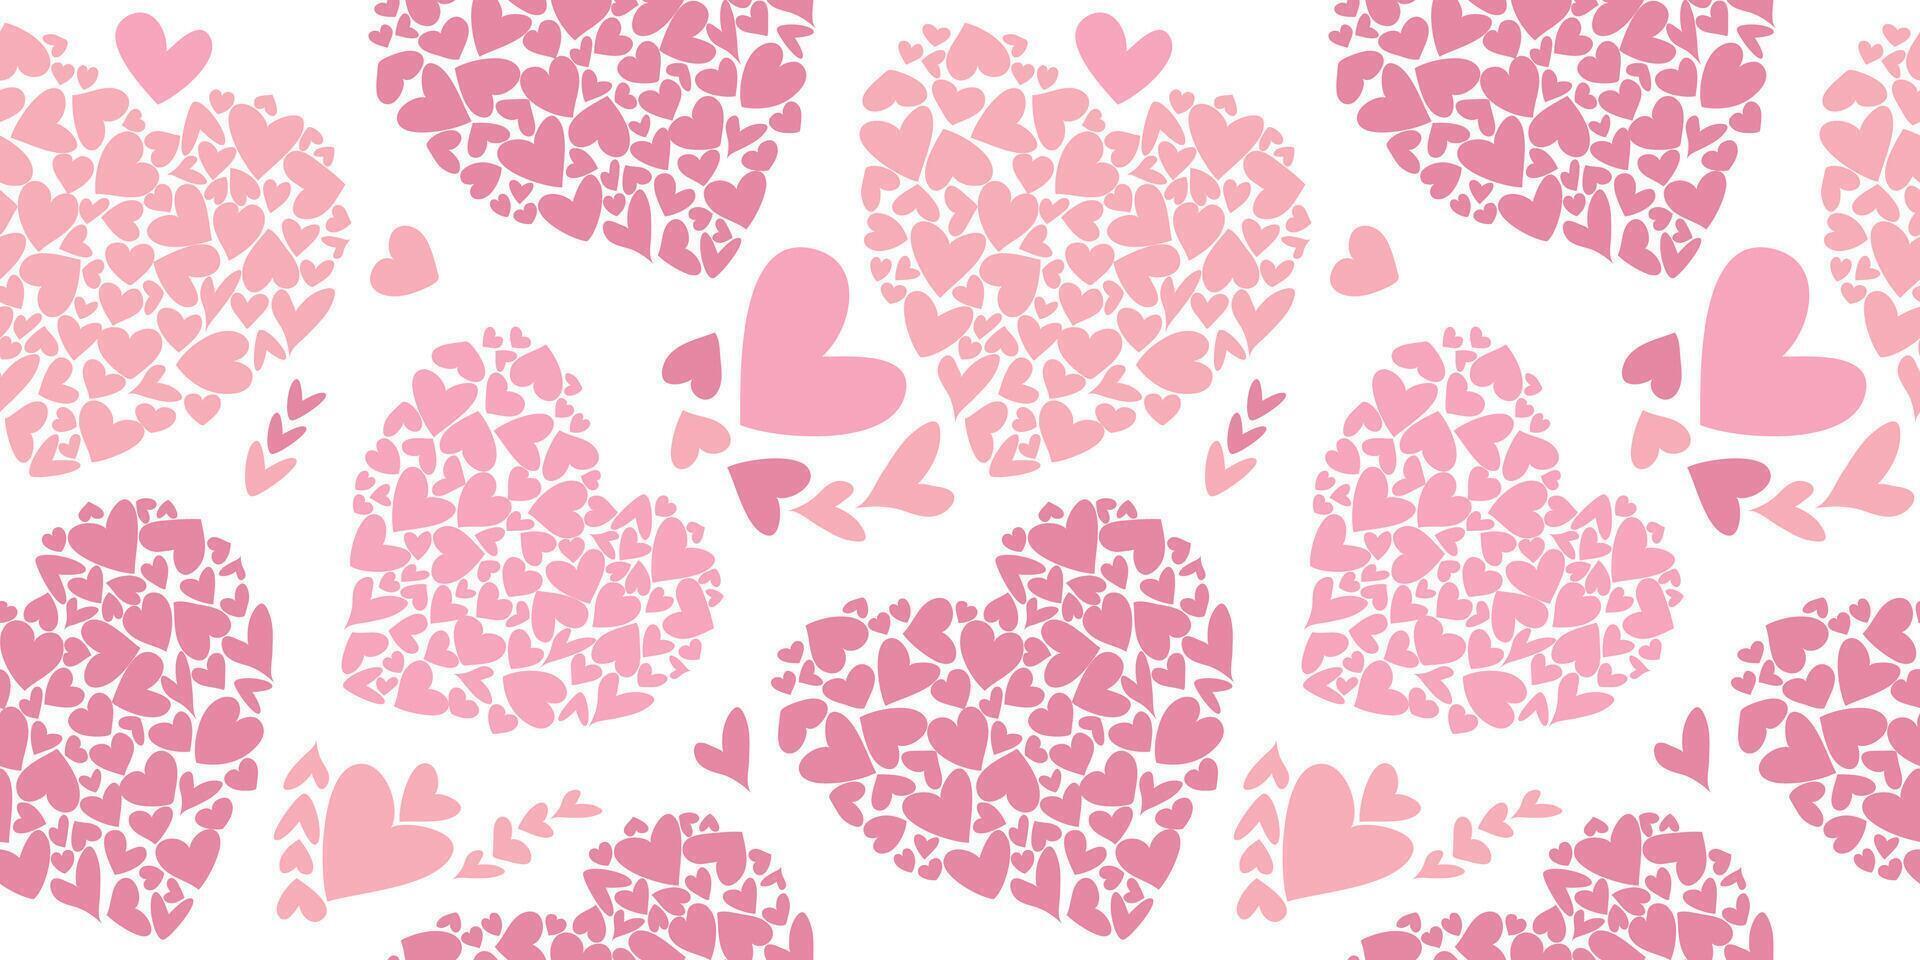 Seamless pattern of hearts. A set of beautiful hearts. Vector illustration on a white background.